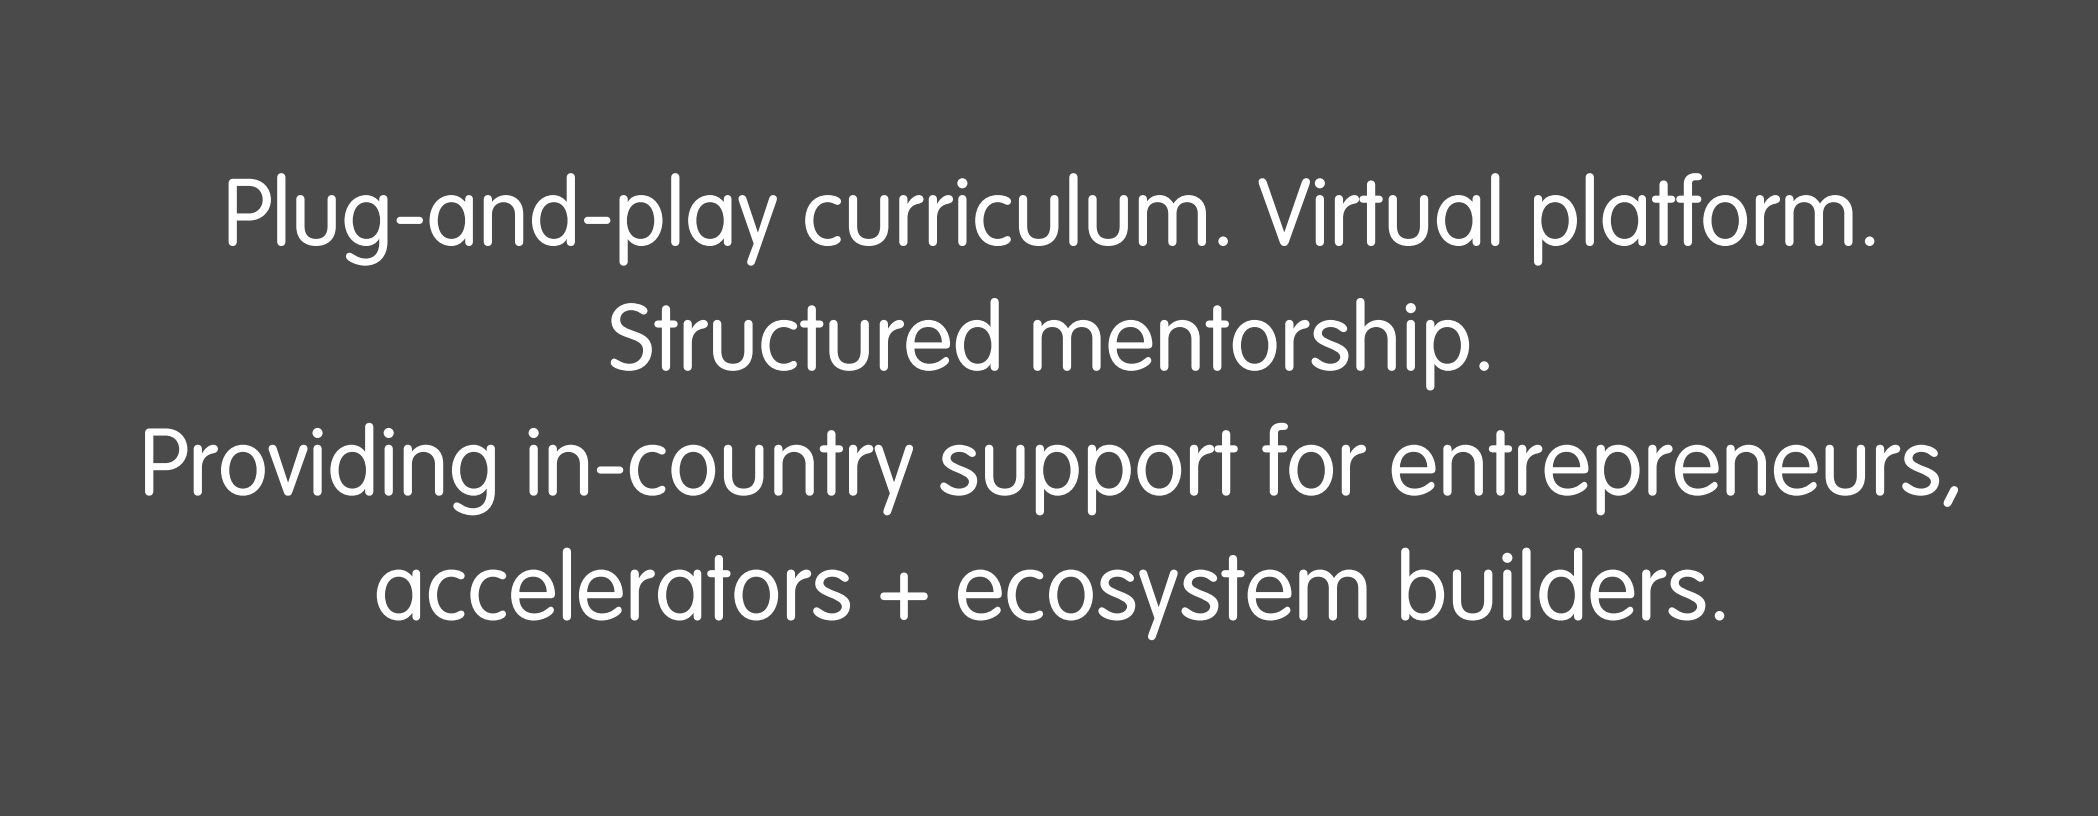 Plug-and-play curriculum. Virtual Platform. Structured mentorship, Providing in-country support for entrepreneurs, accelerators + ecosystem builders.